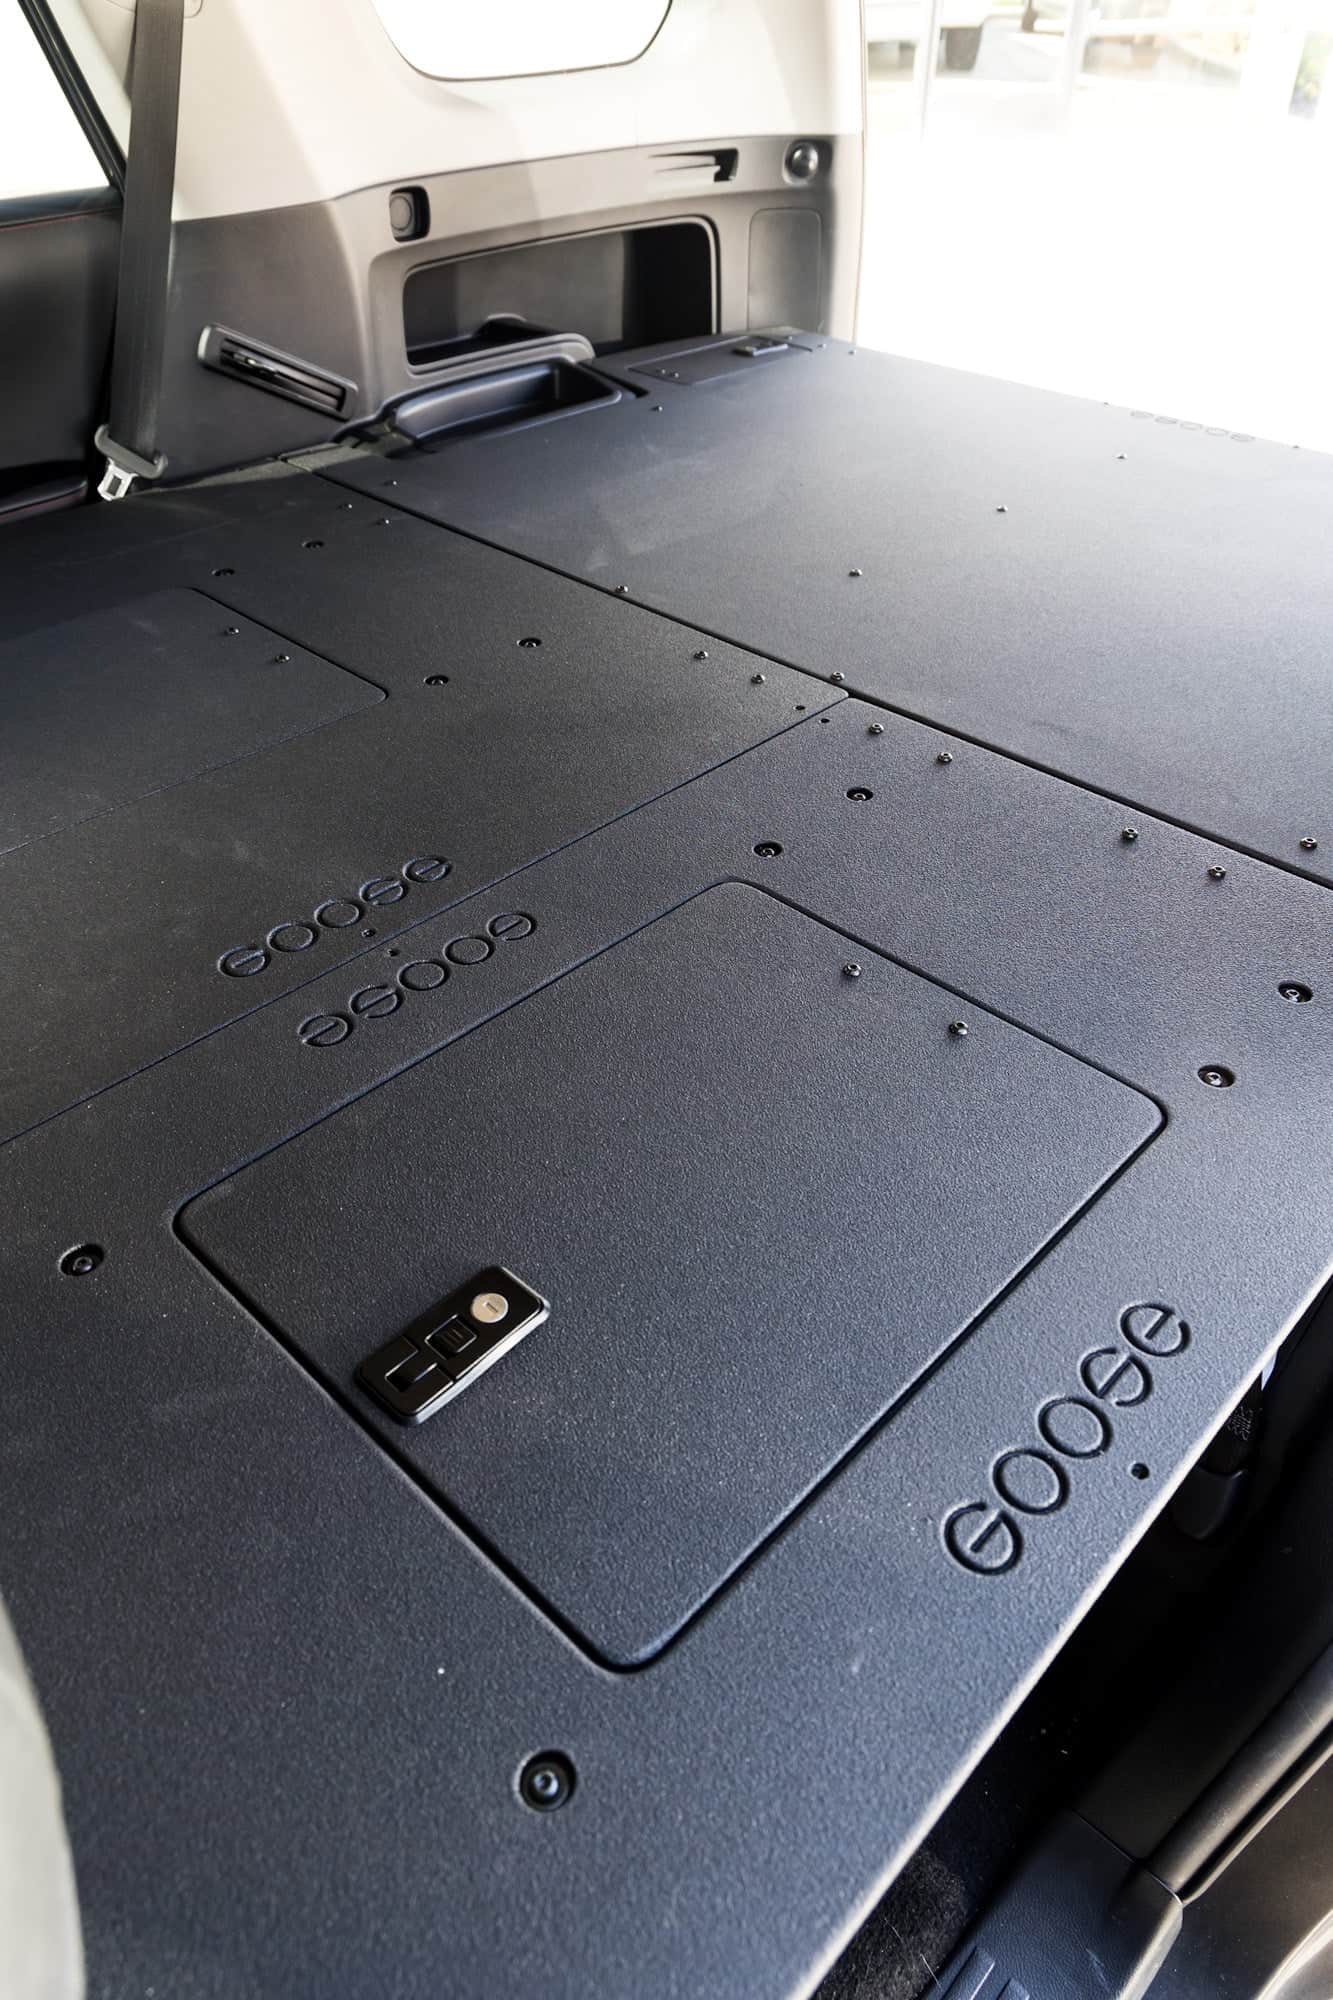 Stealth Sleep and Storage Package with Fitted Top Plate for Toyota 4Runner 2010-Present 5th Gen.